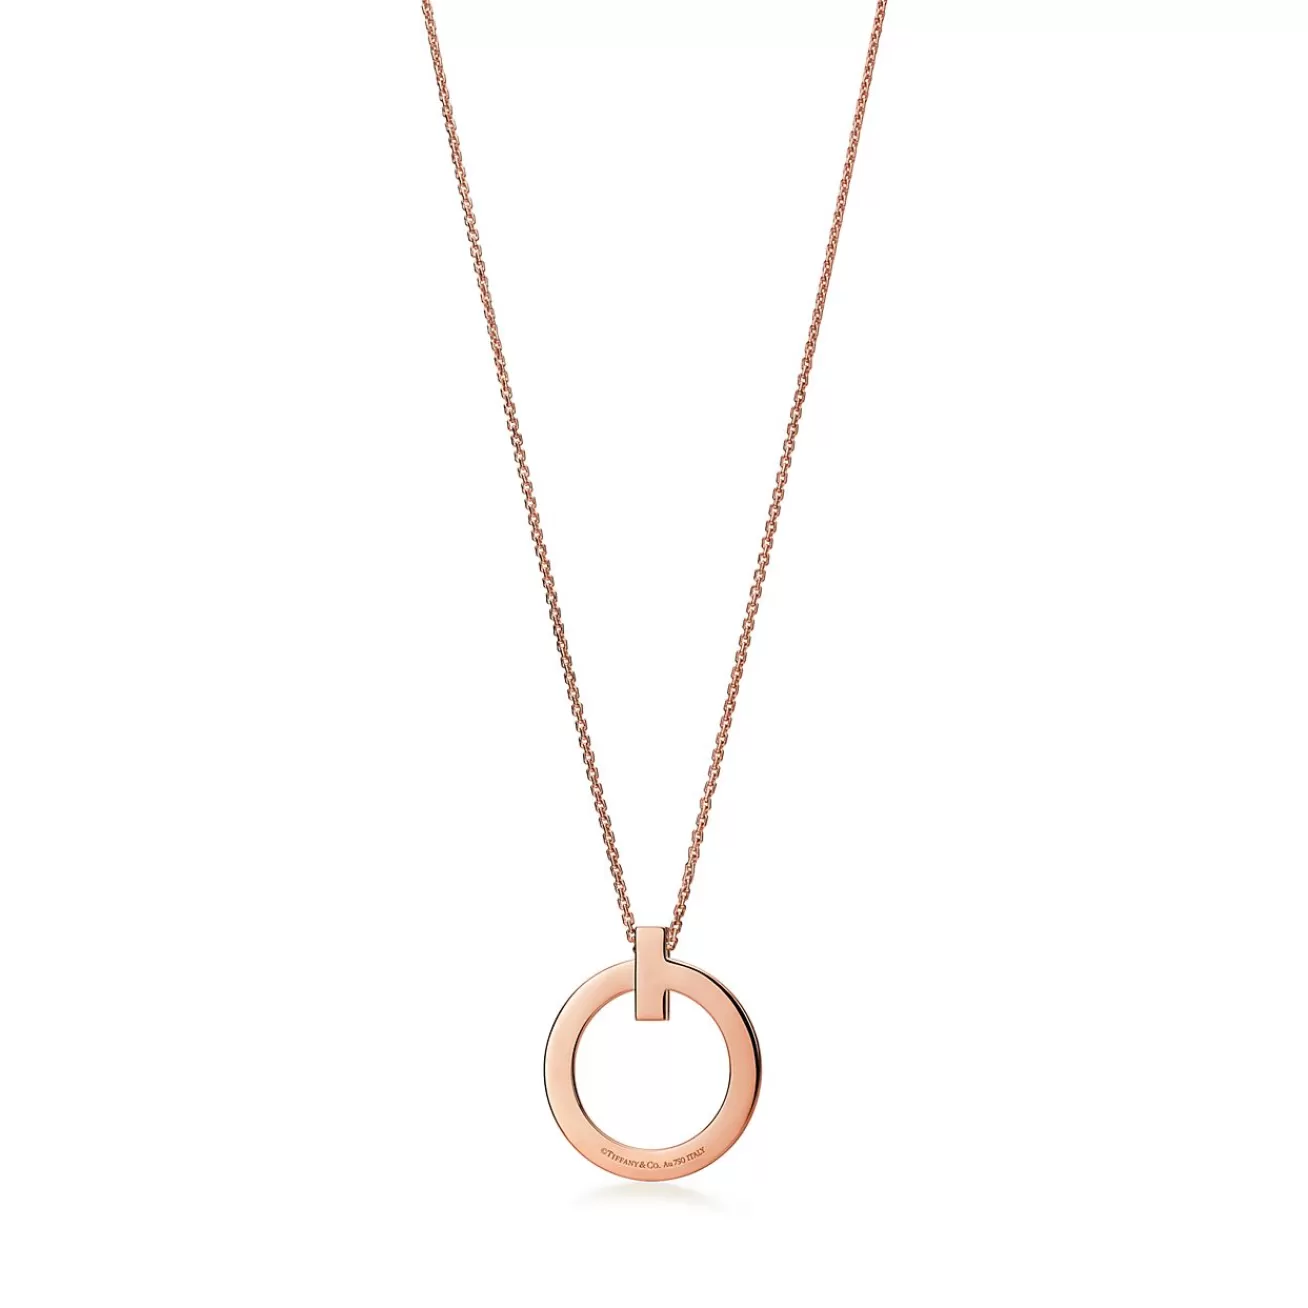 Tiffany & Co. Tiffany T T1 Circle Pendant in Rose Gold, Large | ^ Necklaces & Pendants | Men's Jewelry